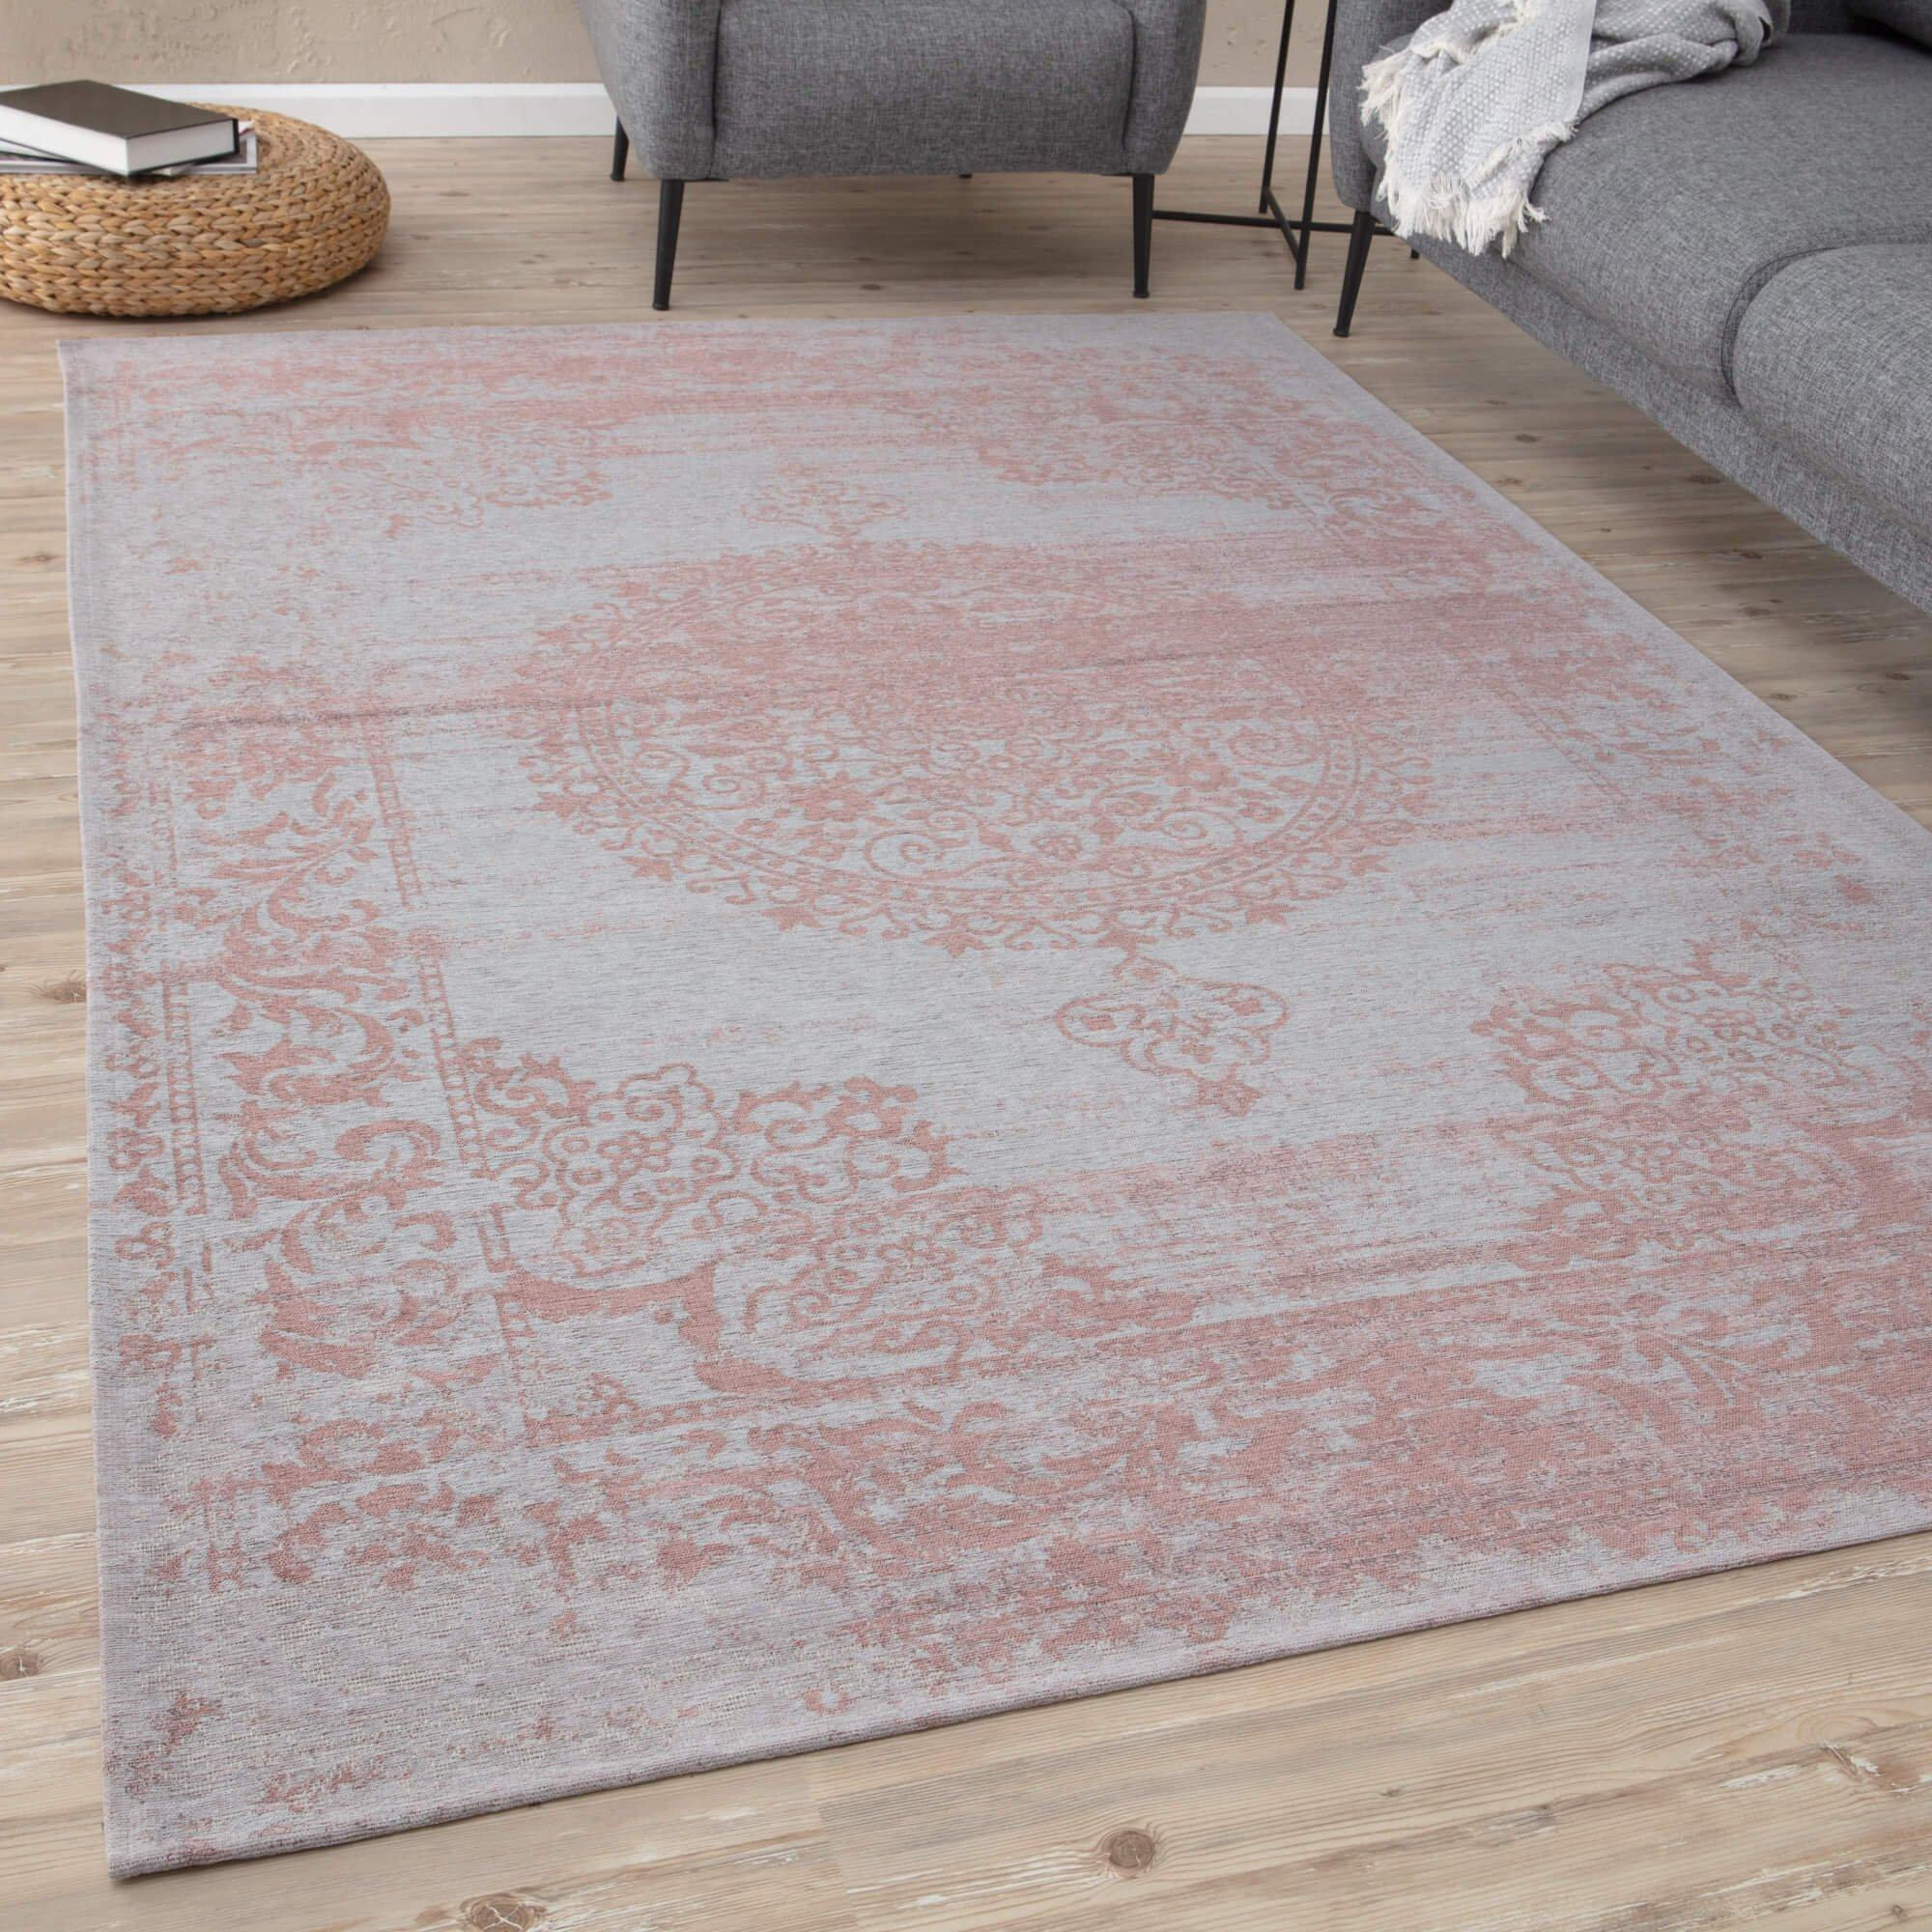 Carina Collection Modern Washable Rugs in Pink - 6941P - image 1